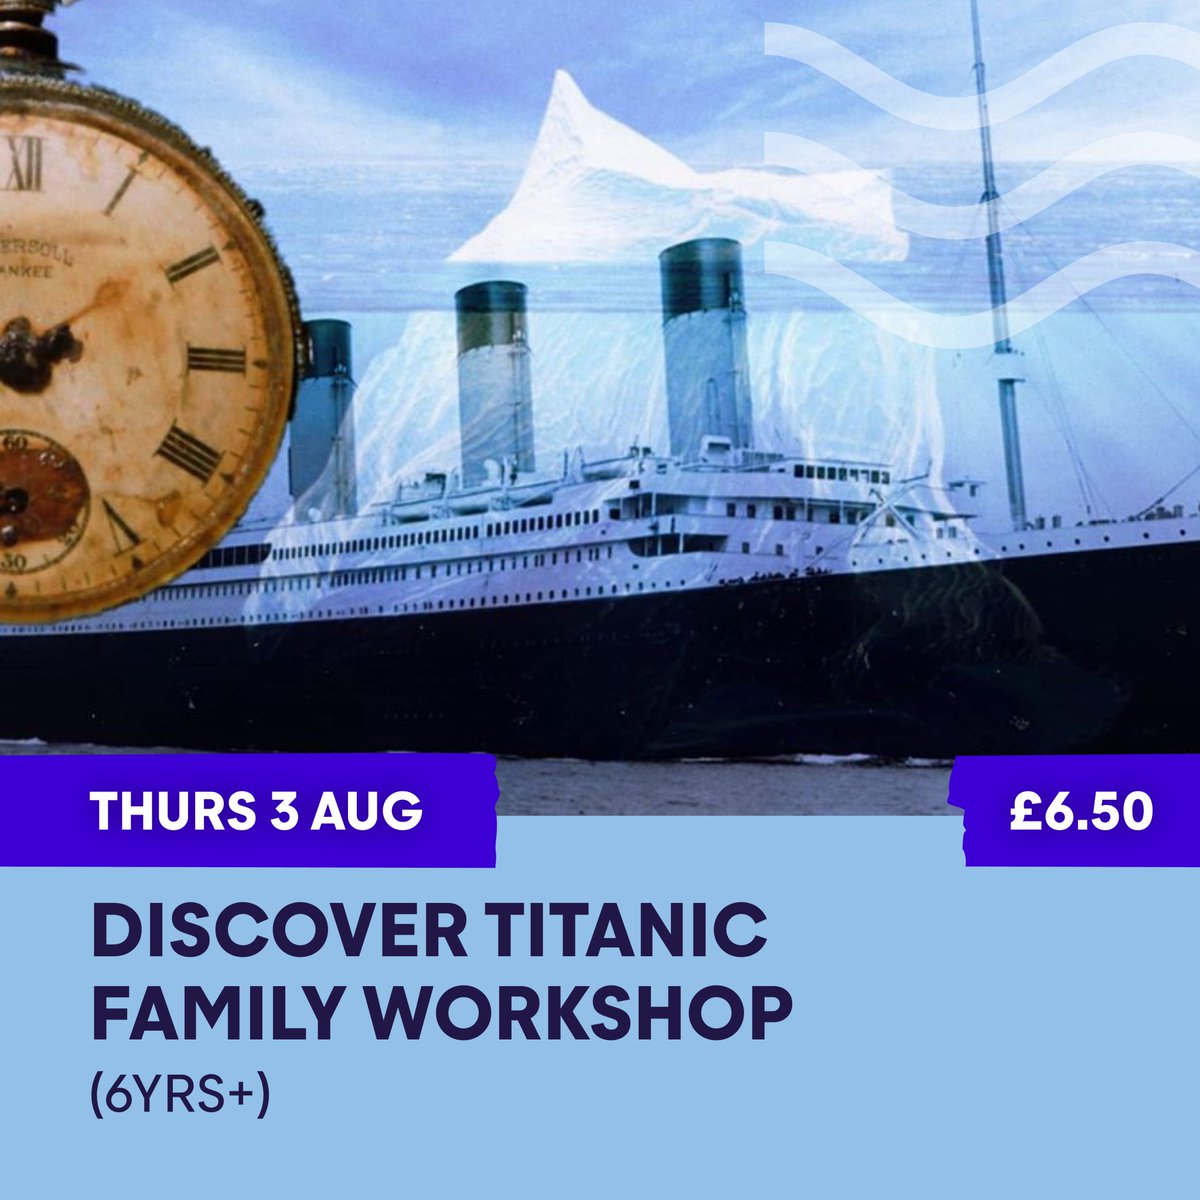 Join us at SeaCity Museum this summer for a fascinating Discover Titanic Family Workshop (6yrs+), Thur 3 Aug, 10.30am, 12pm or 2pm. Try your hand at Morse Code, handle objects from ocean liners, try and sink the Titanic and see how an iceberg floats! wegottickets.com/event/581699